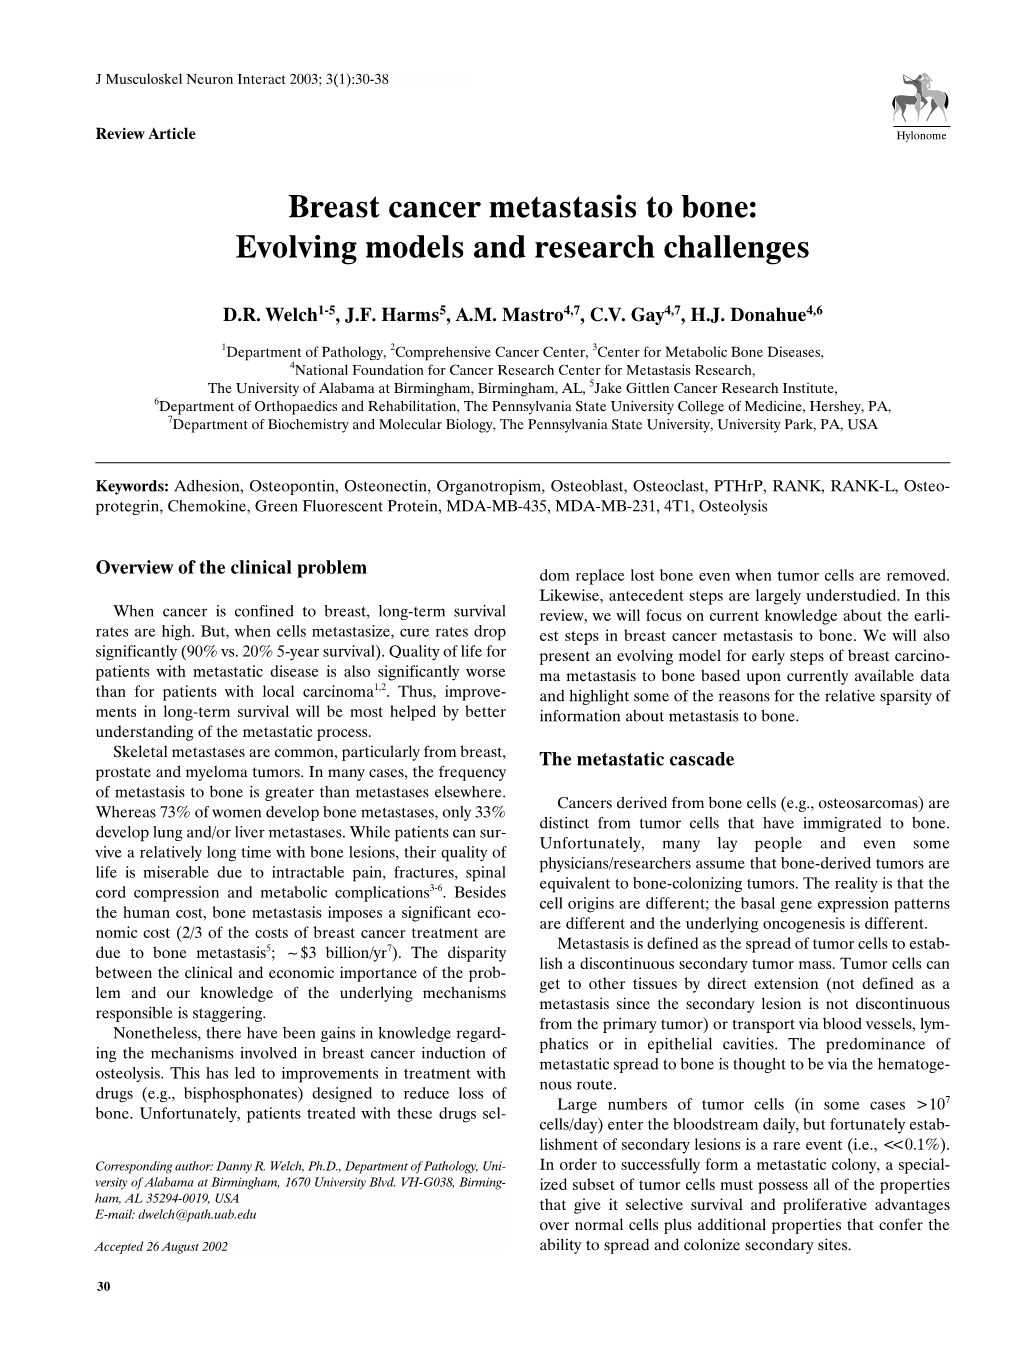 Breast Cancer Metastasis to Bone: Evolving Models and Research Challenges